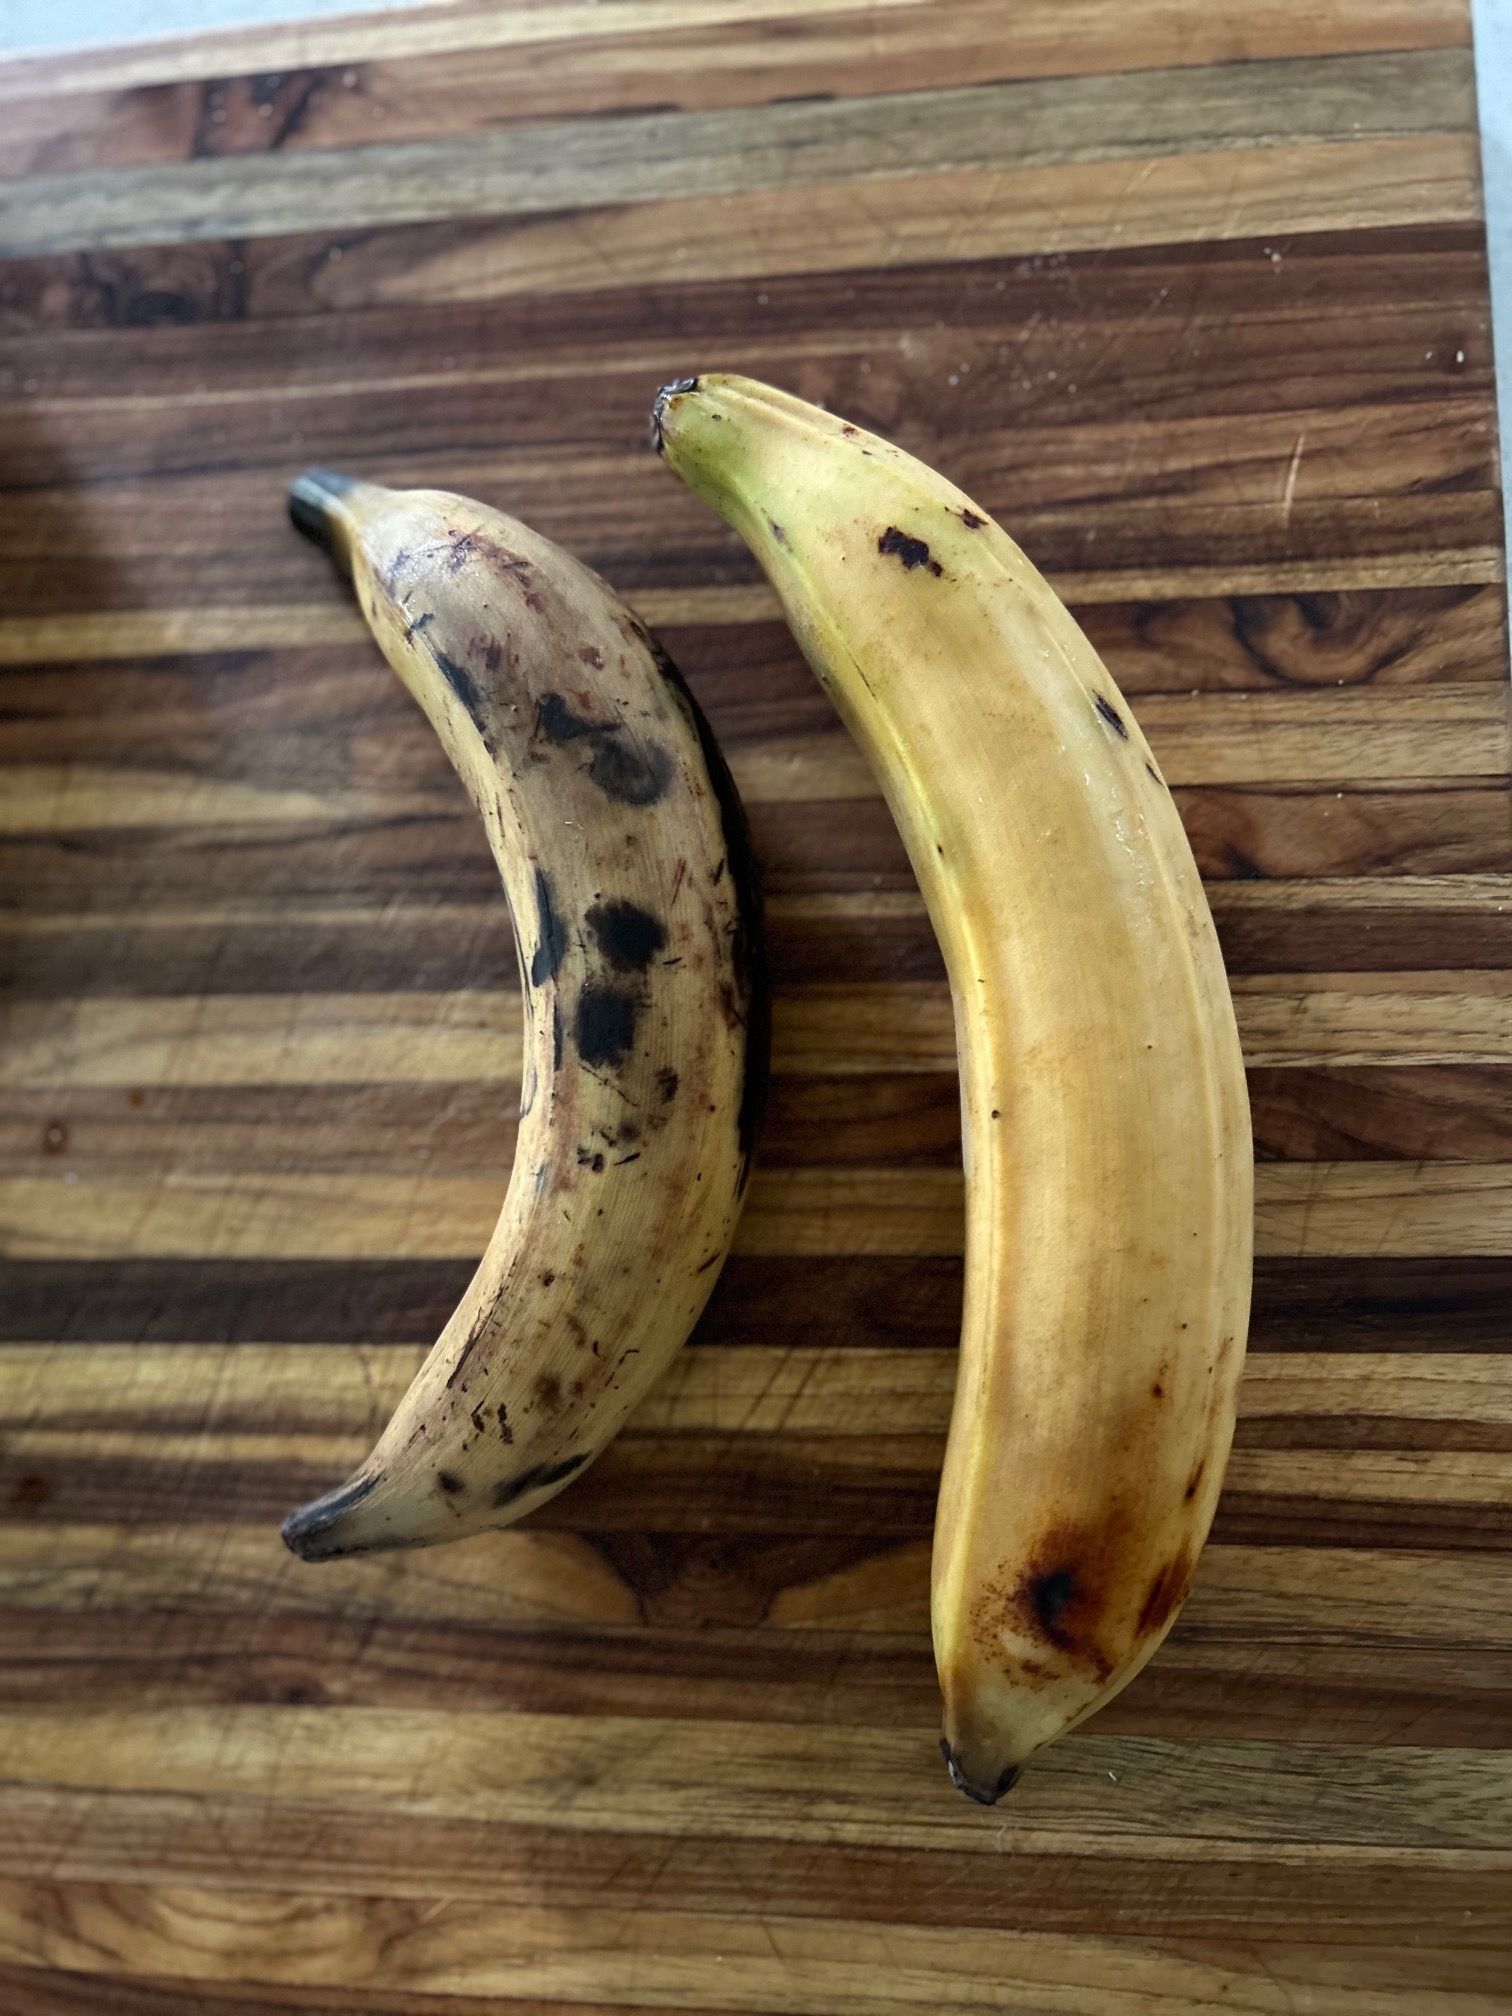 2 ripe plantains on a cutting block